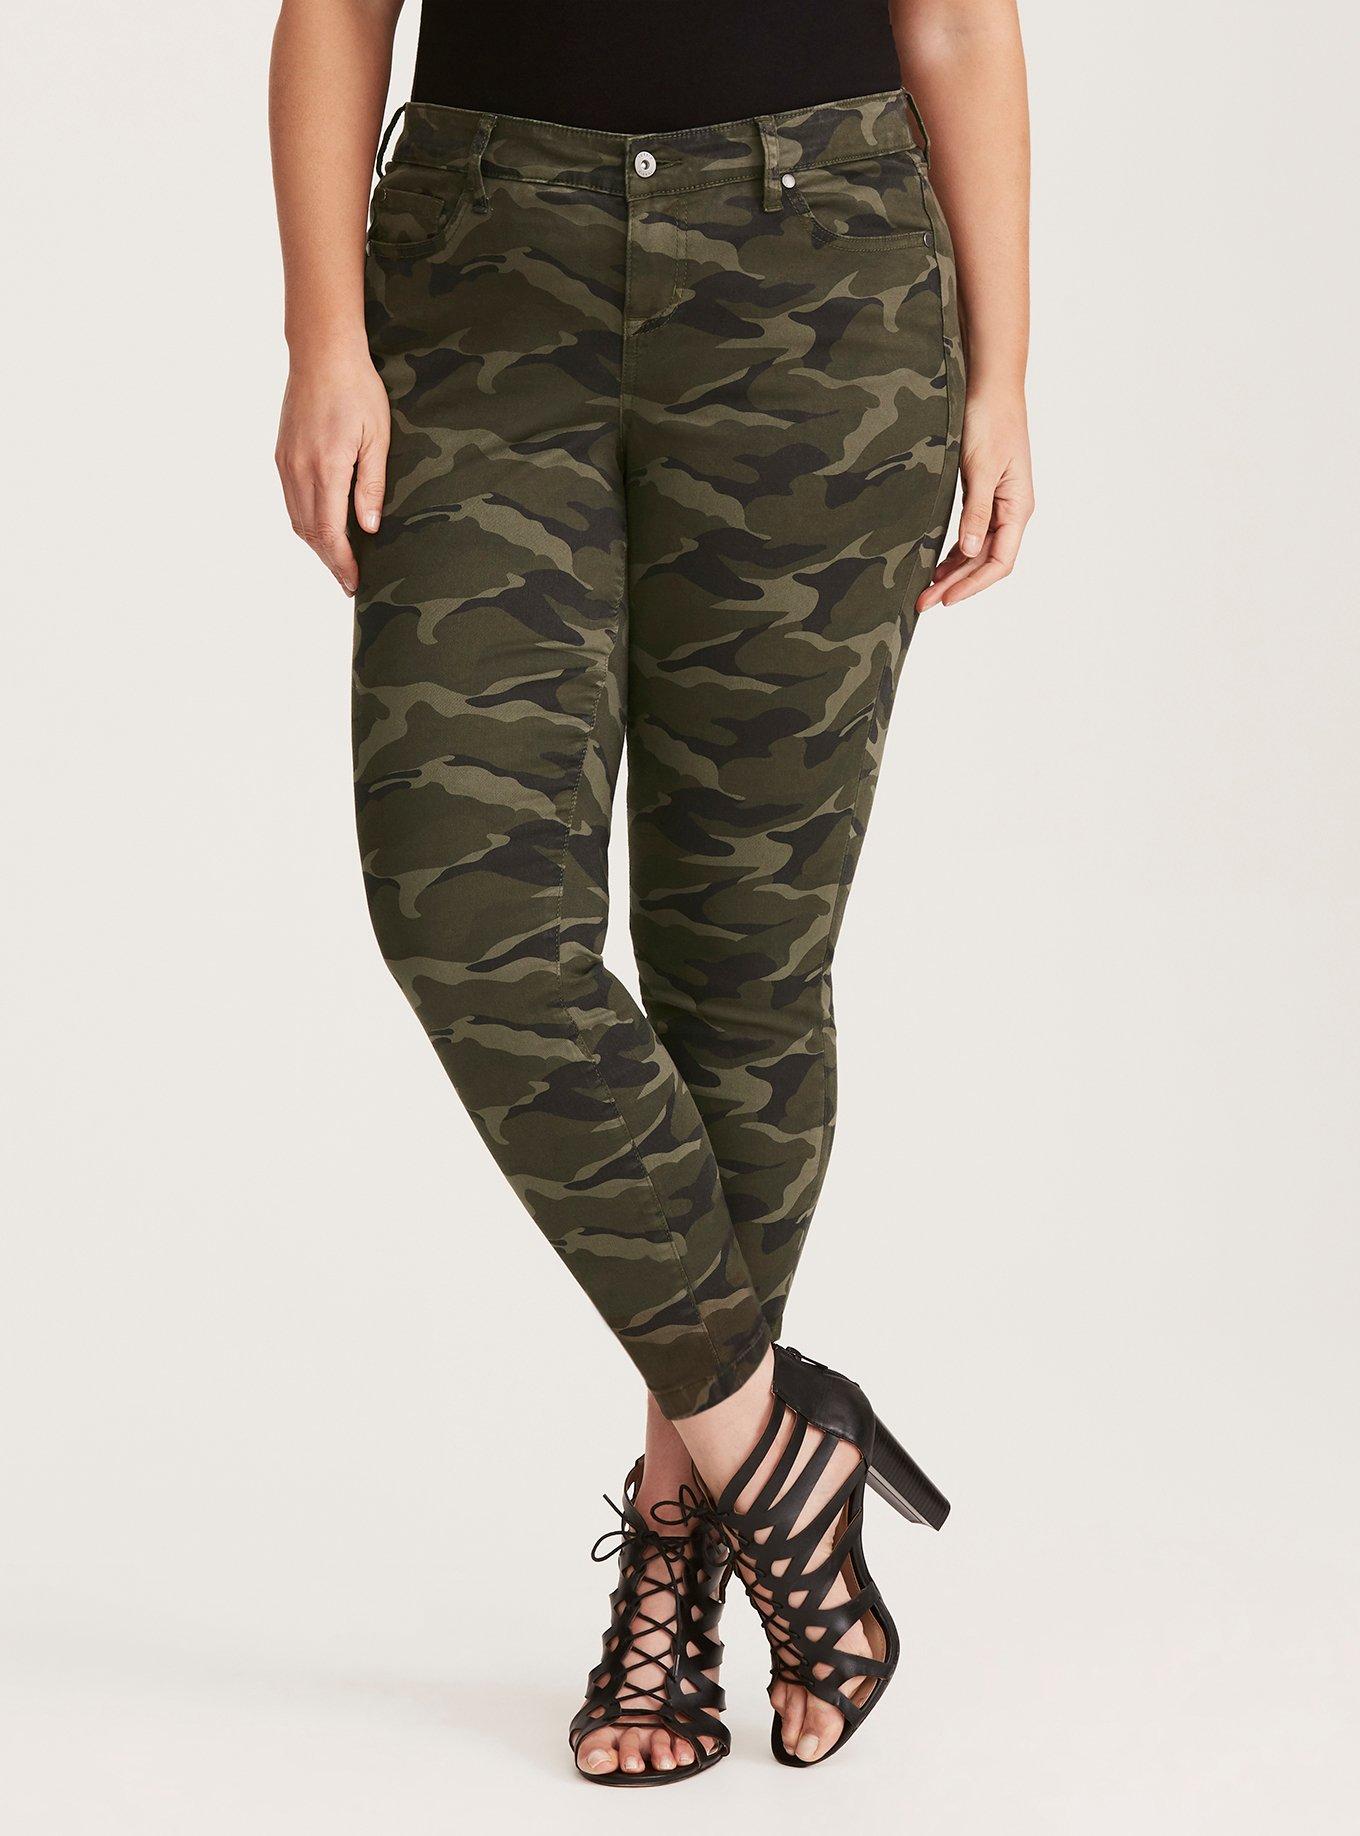 Women Fashion Camouflage Pants Army Skinny Fit Stretchy Jeans Jeggings  Trousers